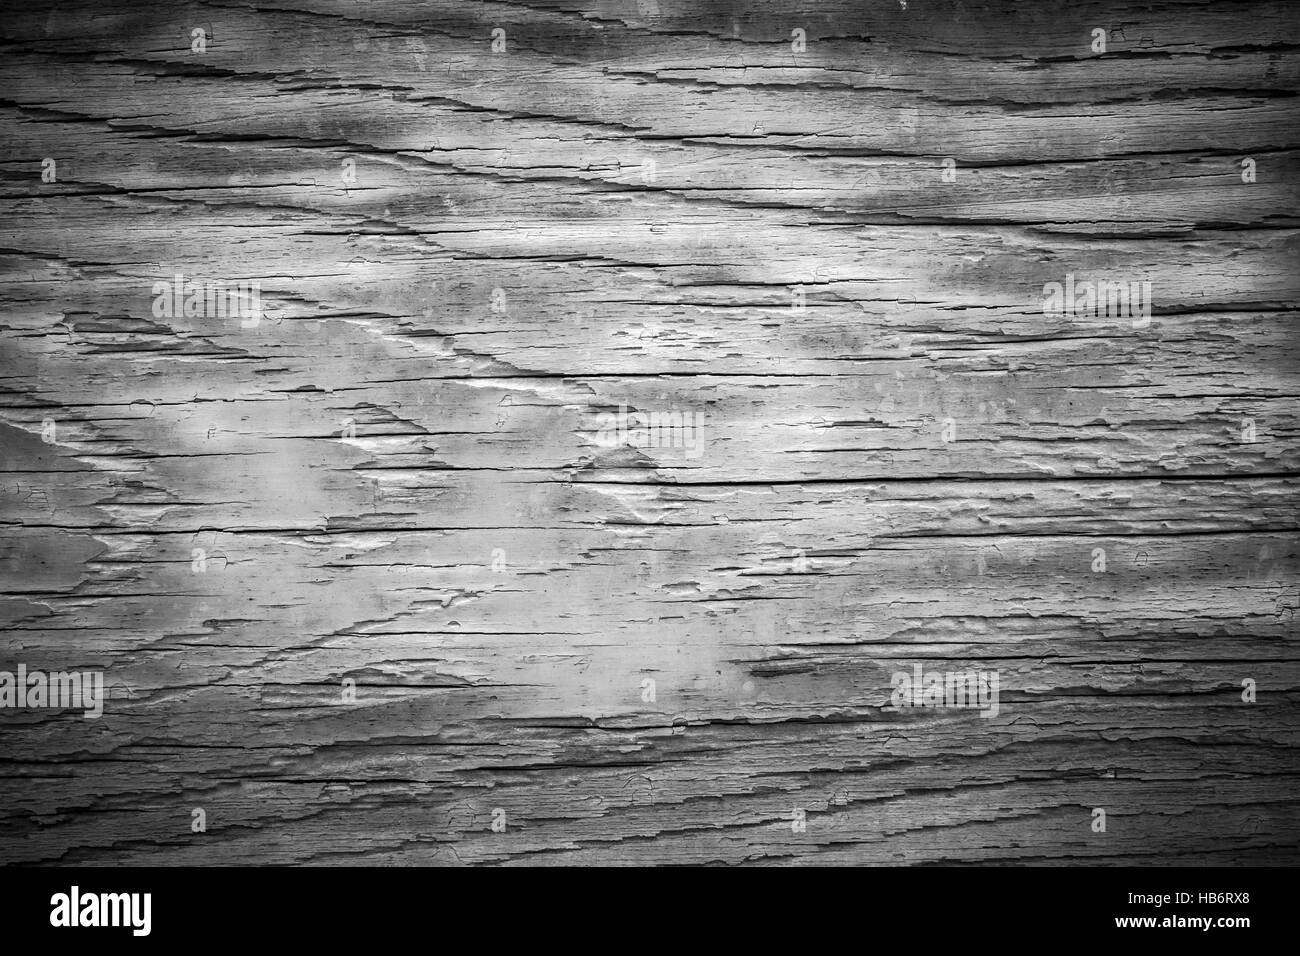 Scratched wood texture Stock Photo